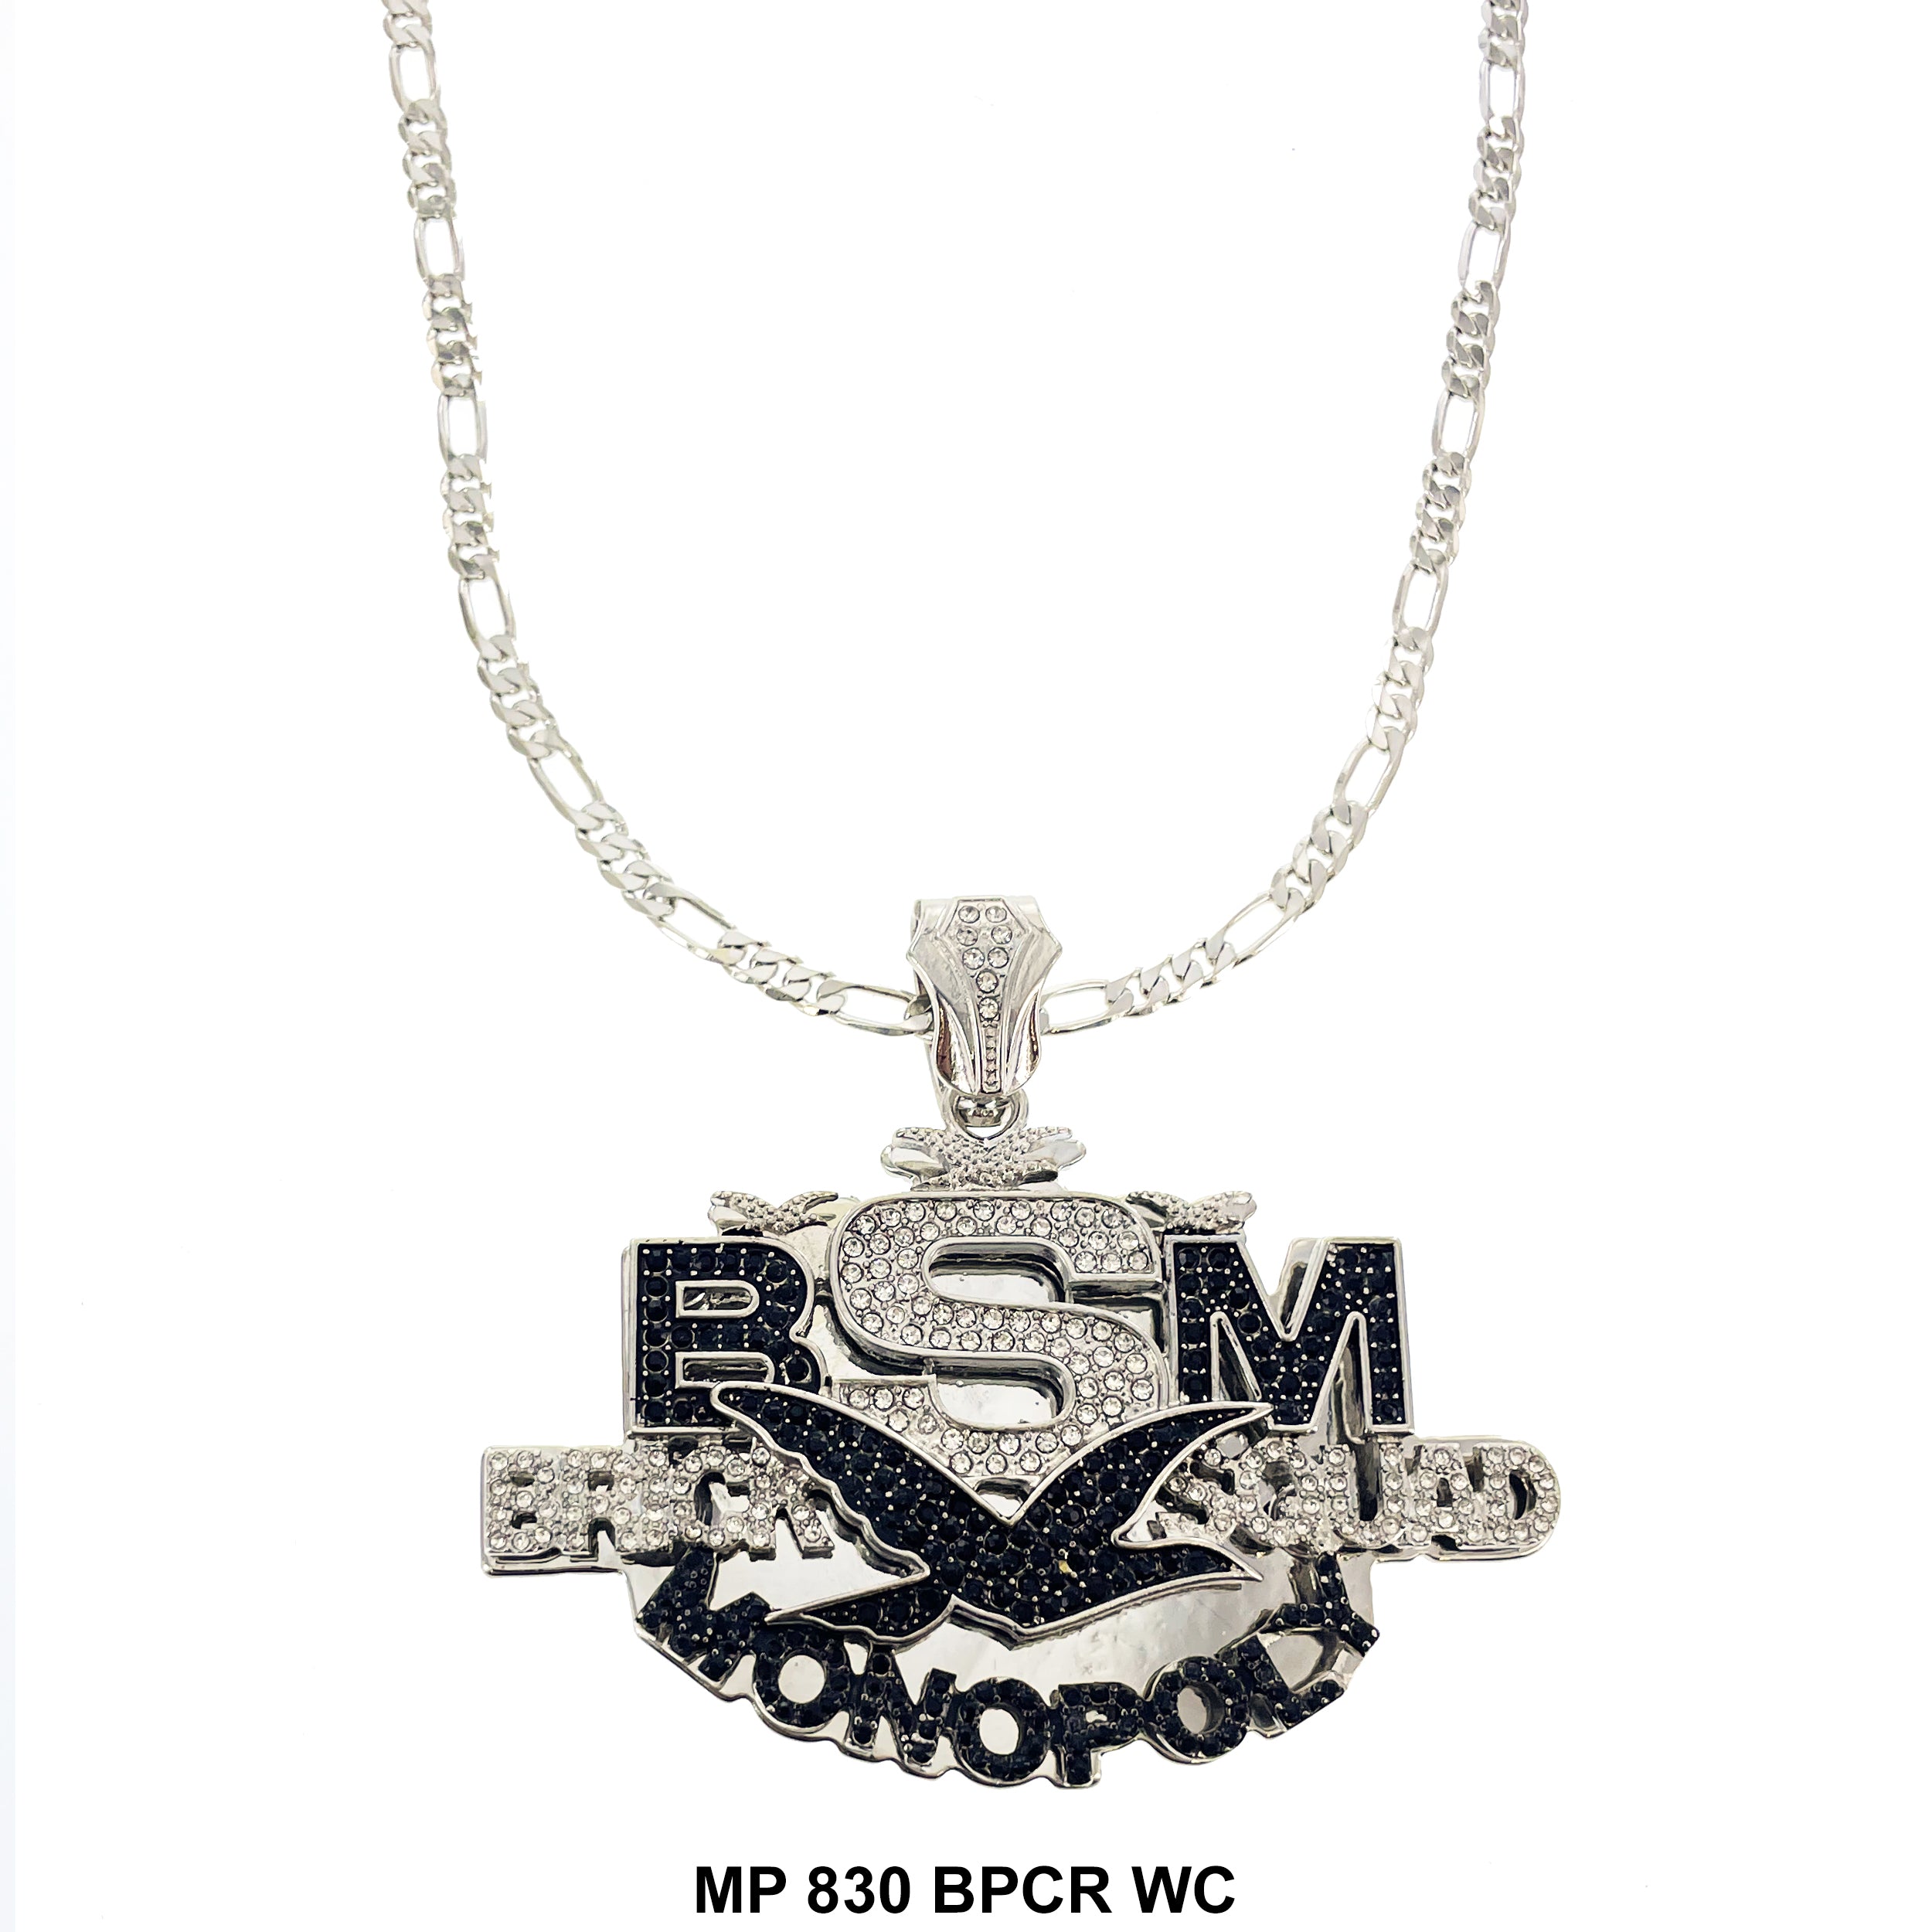 Bsm Pendant With Chain MP 830 BPCR WC